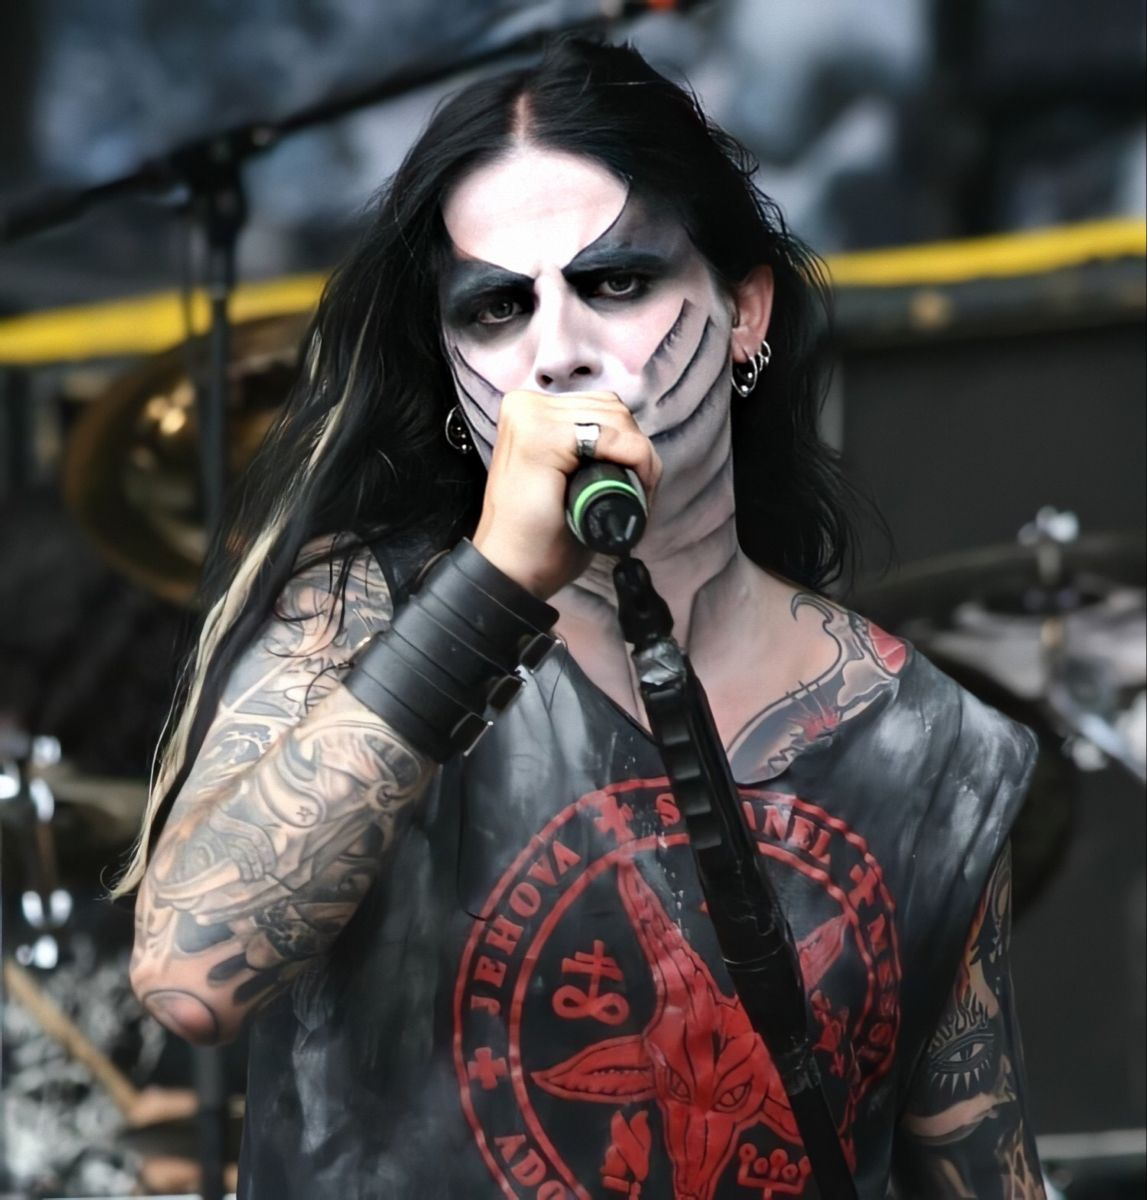 Total Darkness Promotions on X: Shagrath (Dimmu Borgir) - Stian Tomt  Thoresen AKA Shagrath is celebrating his 44th birthday today. The man  created a legacy with Enthrone Darkness Triumphant being the absolute